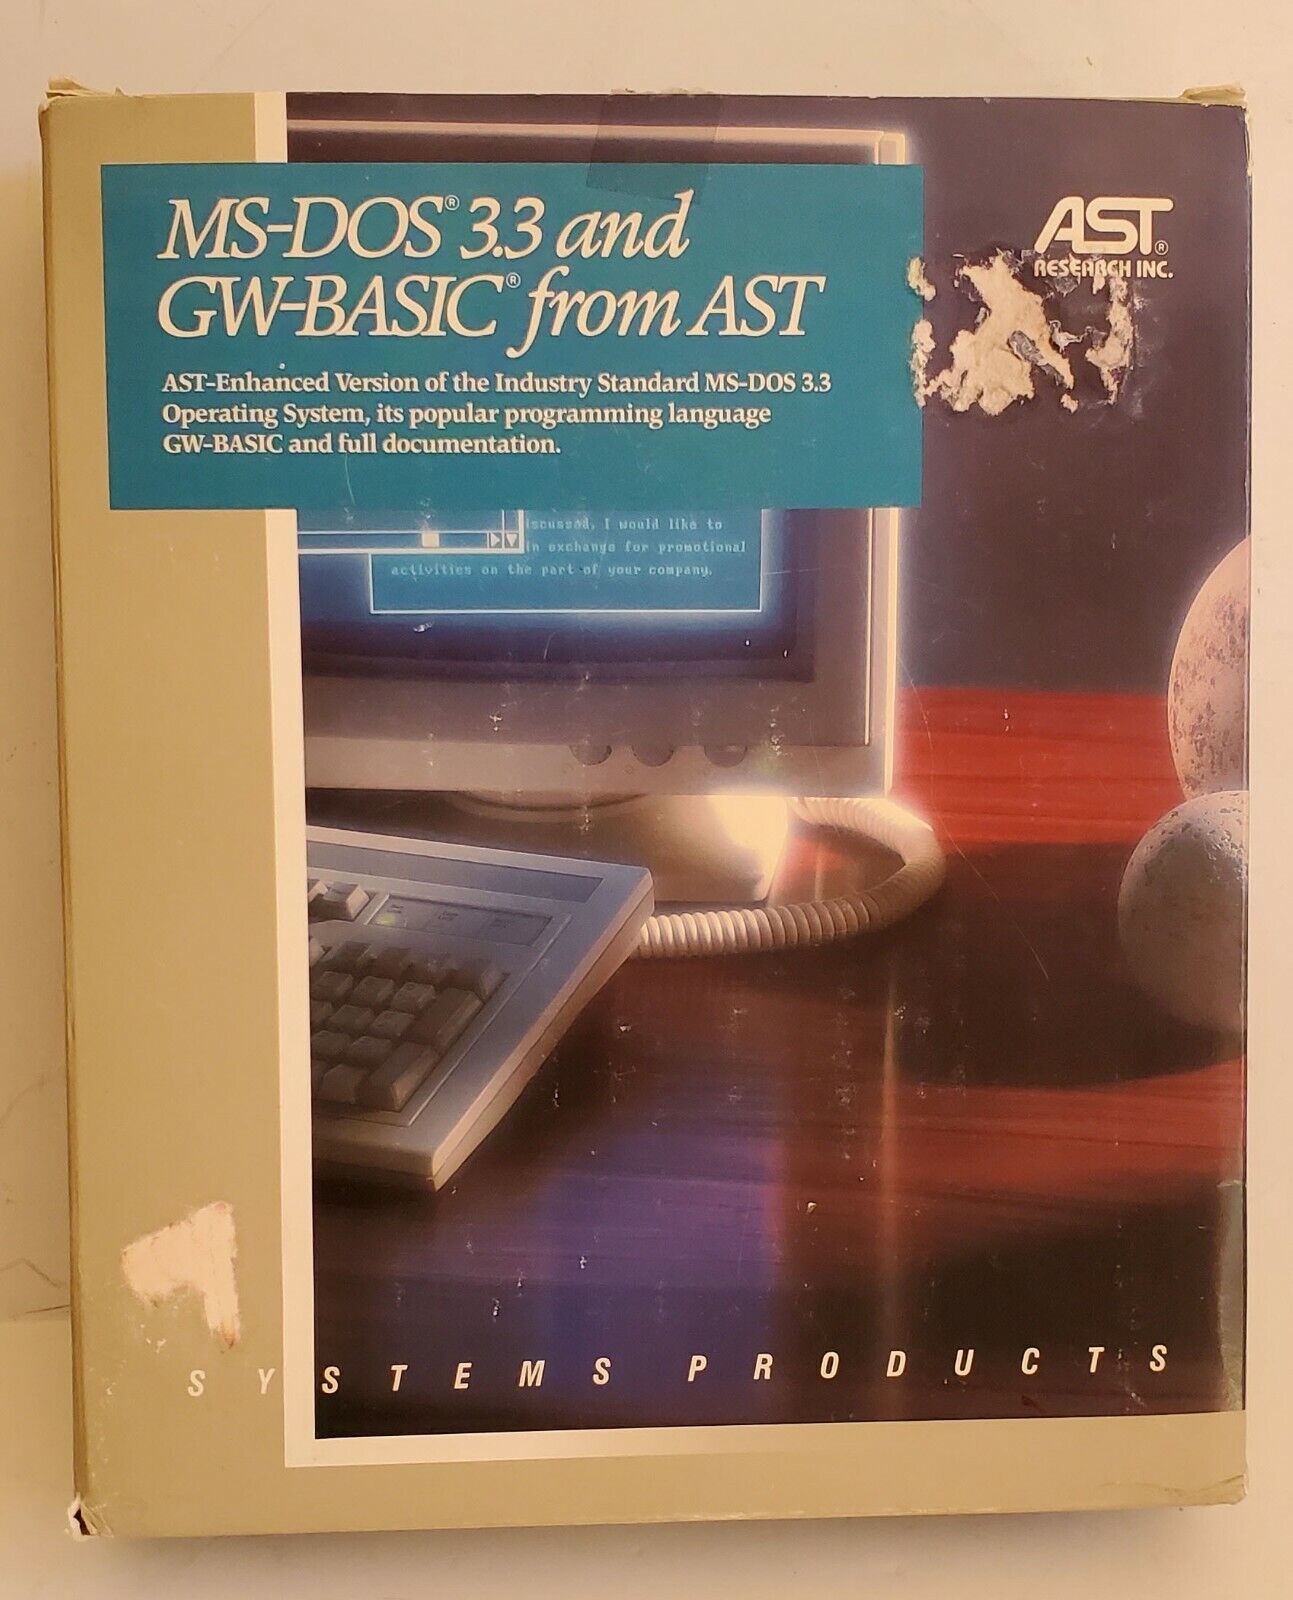 MS-DOS 3.3 and GW-BASIC from AST